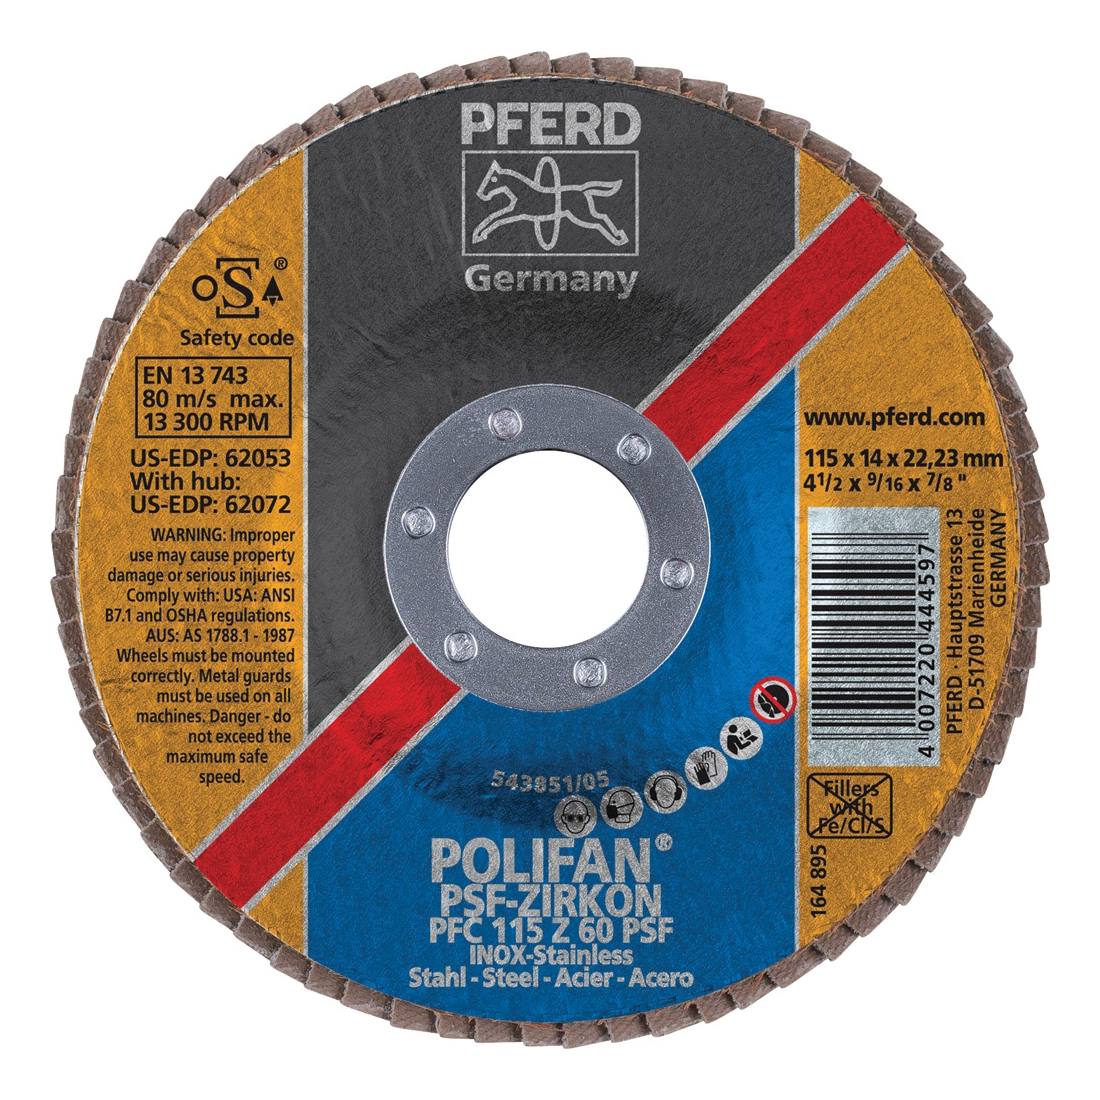 PFERD Polifan® 62053 Universal Line PSF-Z Unthreaded Coated Abrasive Flap Disc, 4-1/2 in Dia, 7/8 in Center Hole, 60 Grit, Zirconia Alumina Abrasive, Type 29 Conical Disc